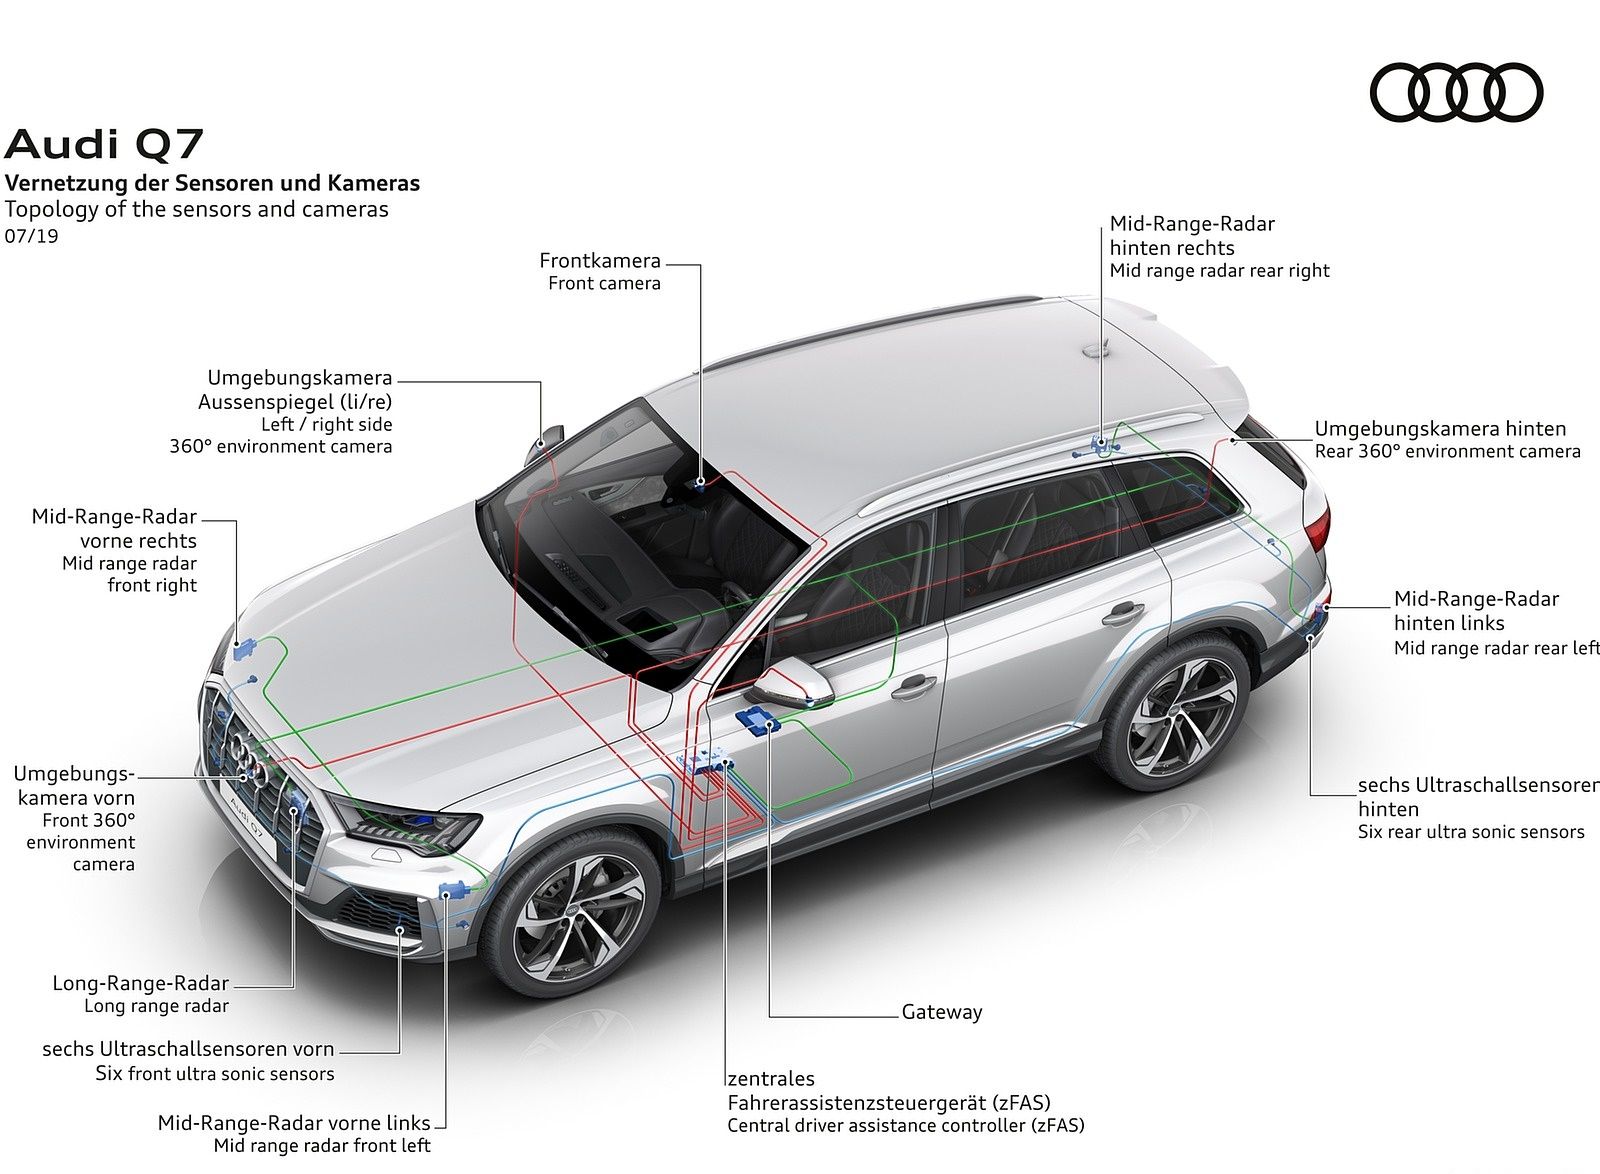 Audi Q7 Topology of the sensors and cameras Wallpaper (114)